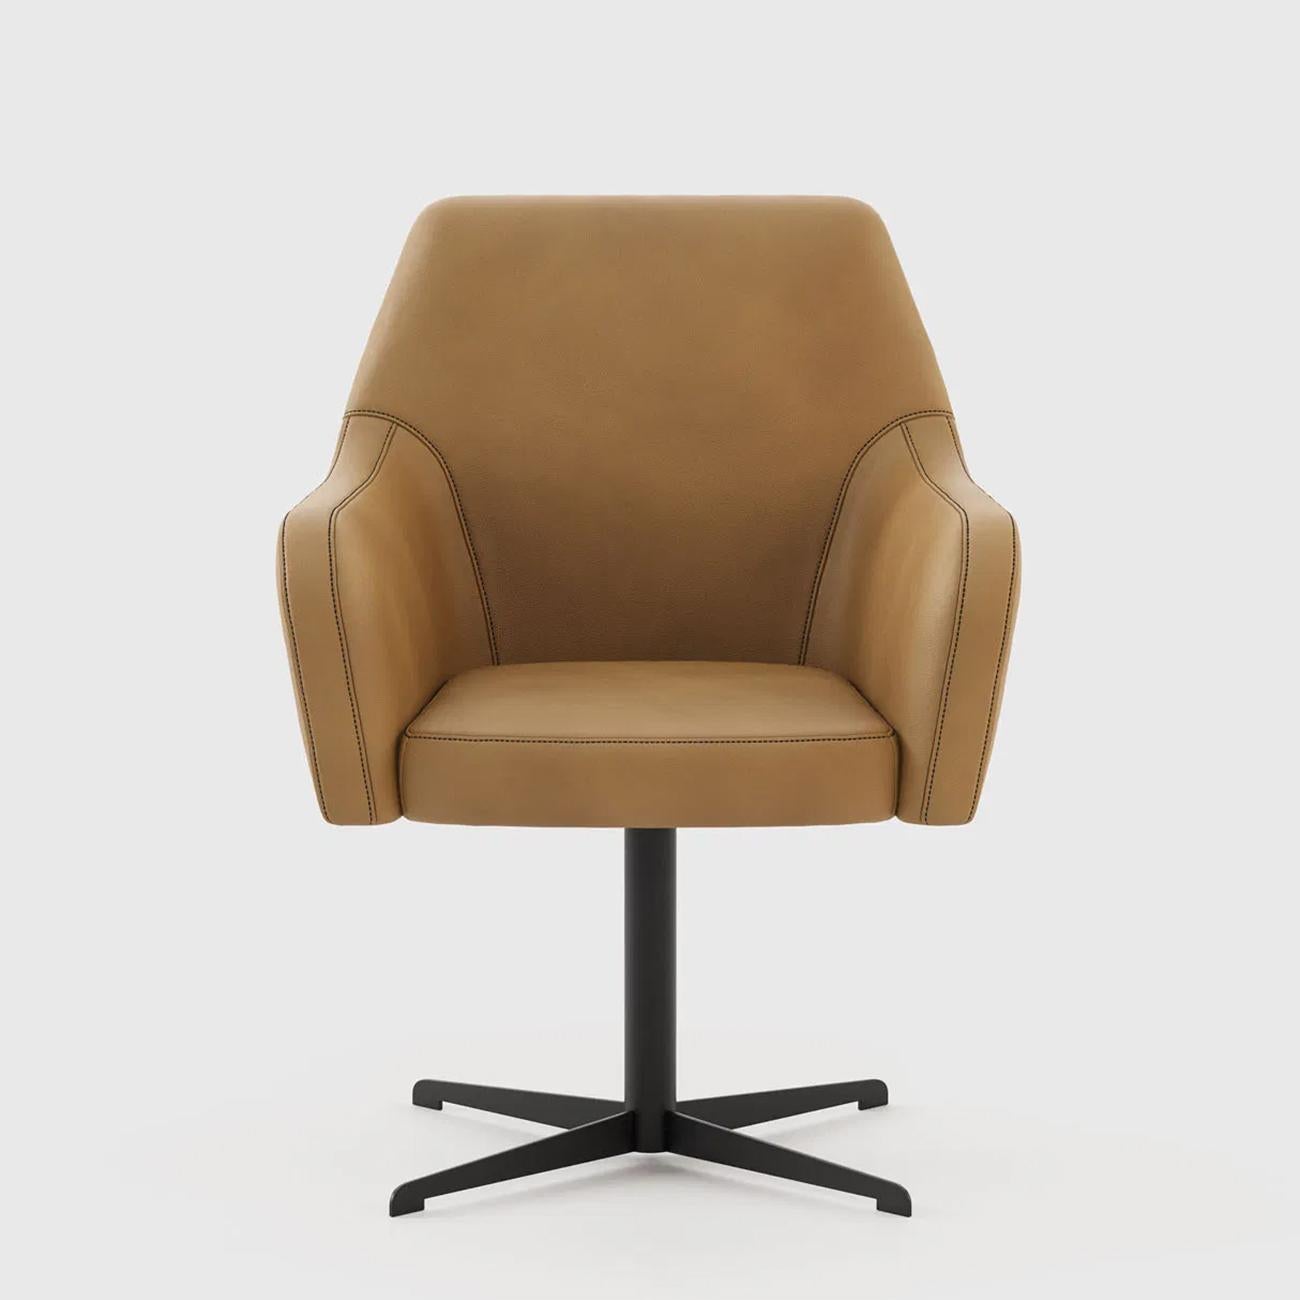 Spanish Bount Office Chair For Sale